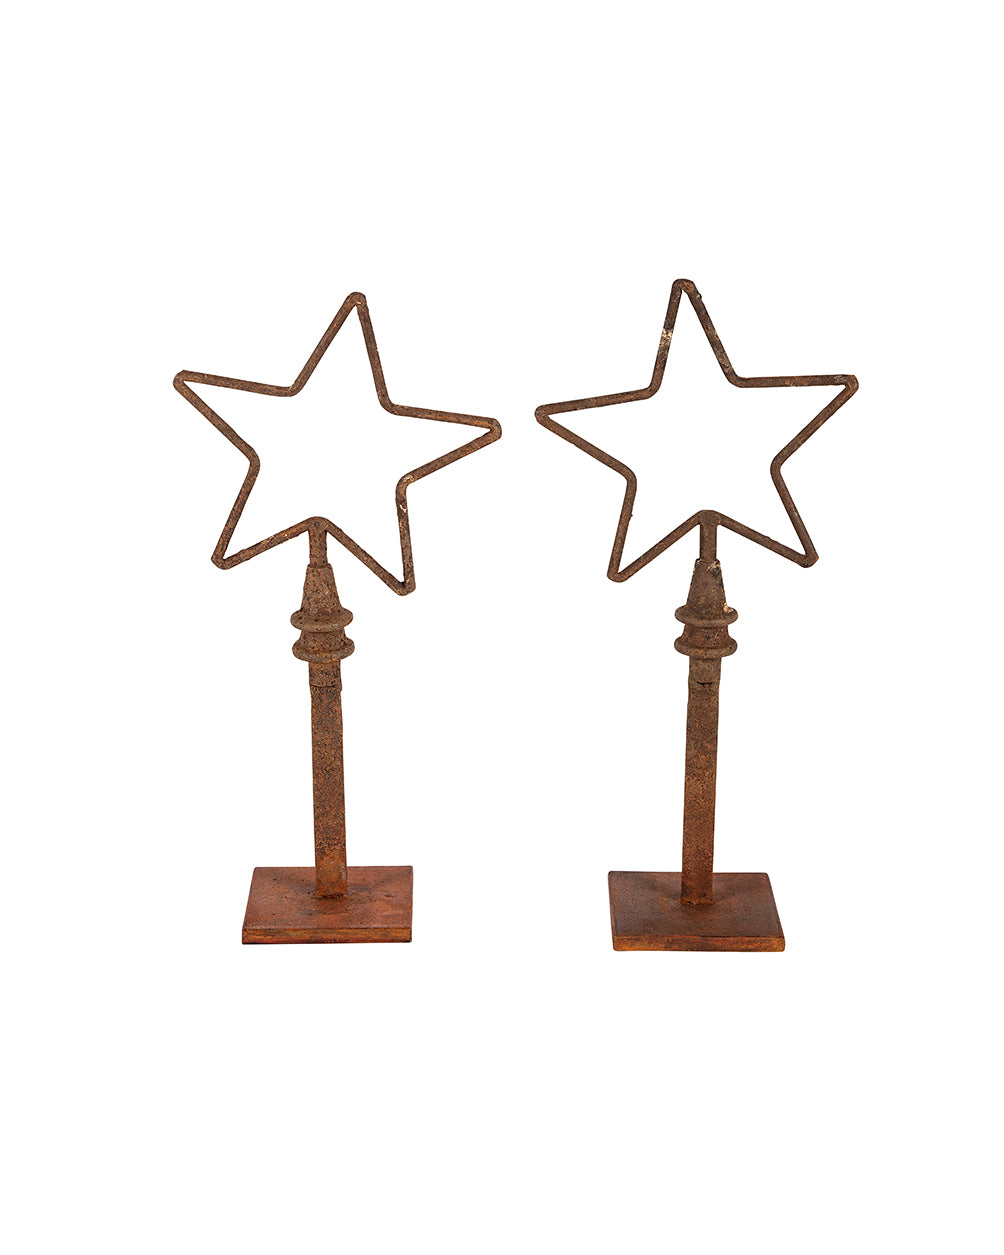 Pair of star-shaped iron sculptures